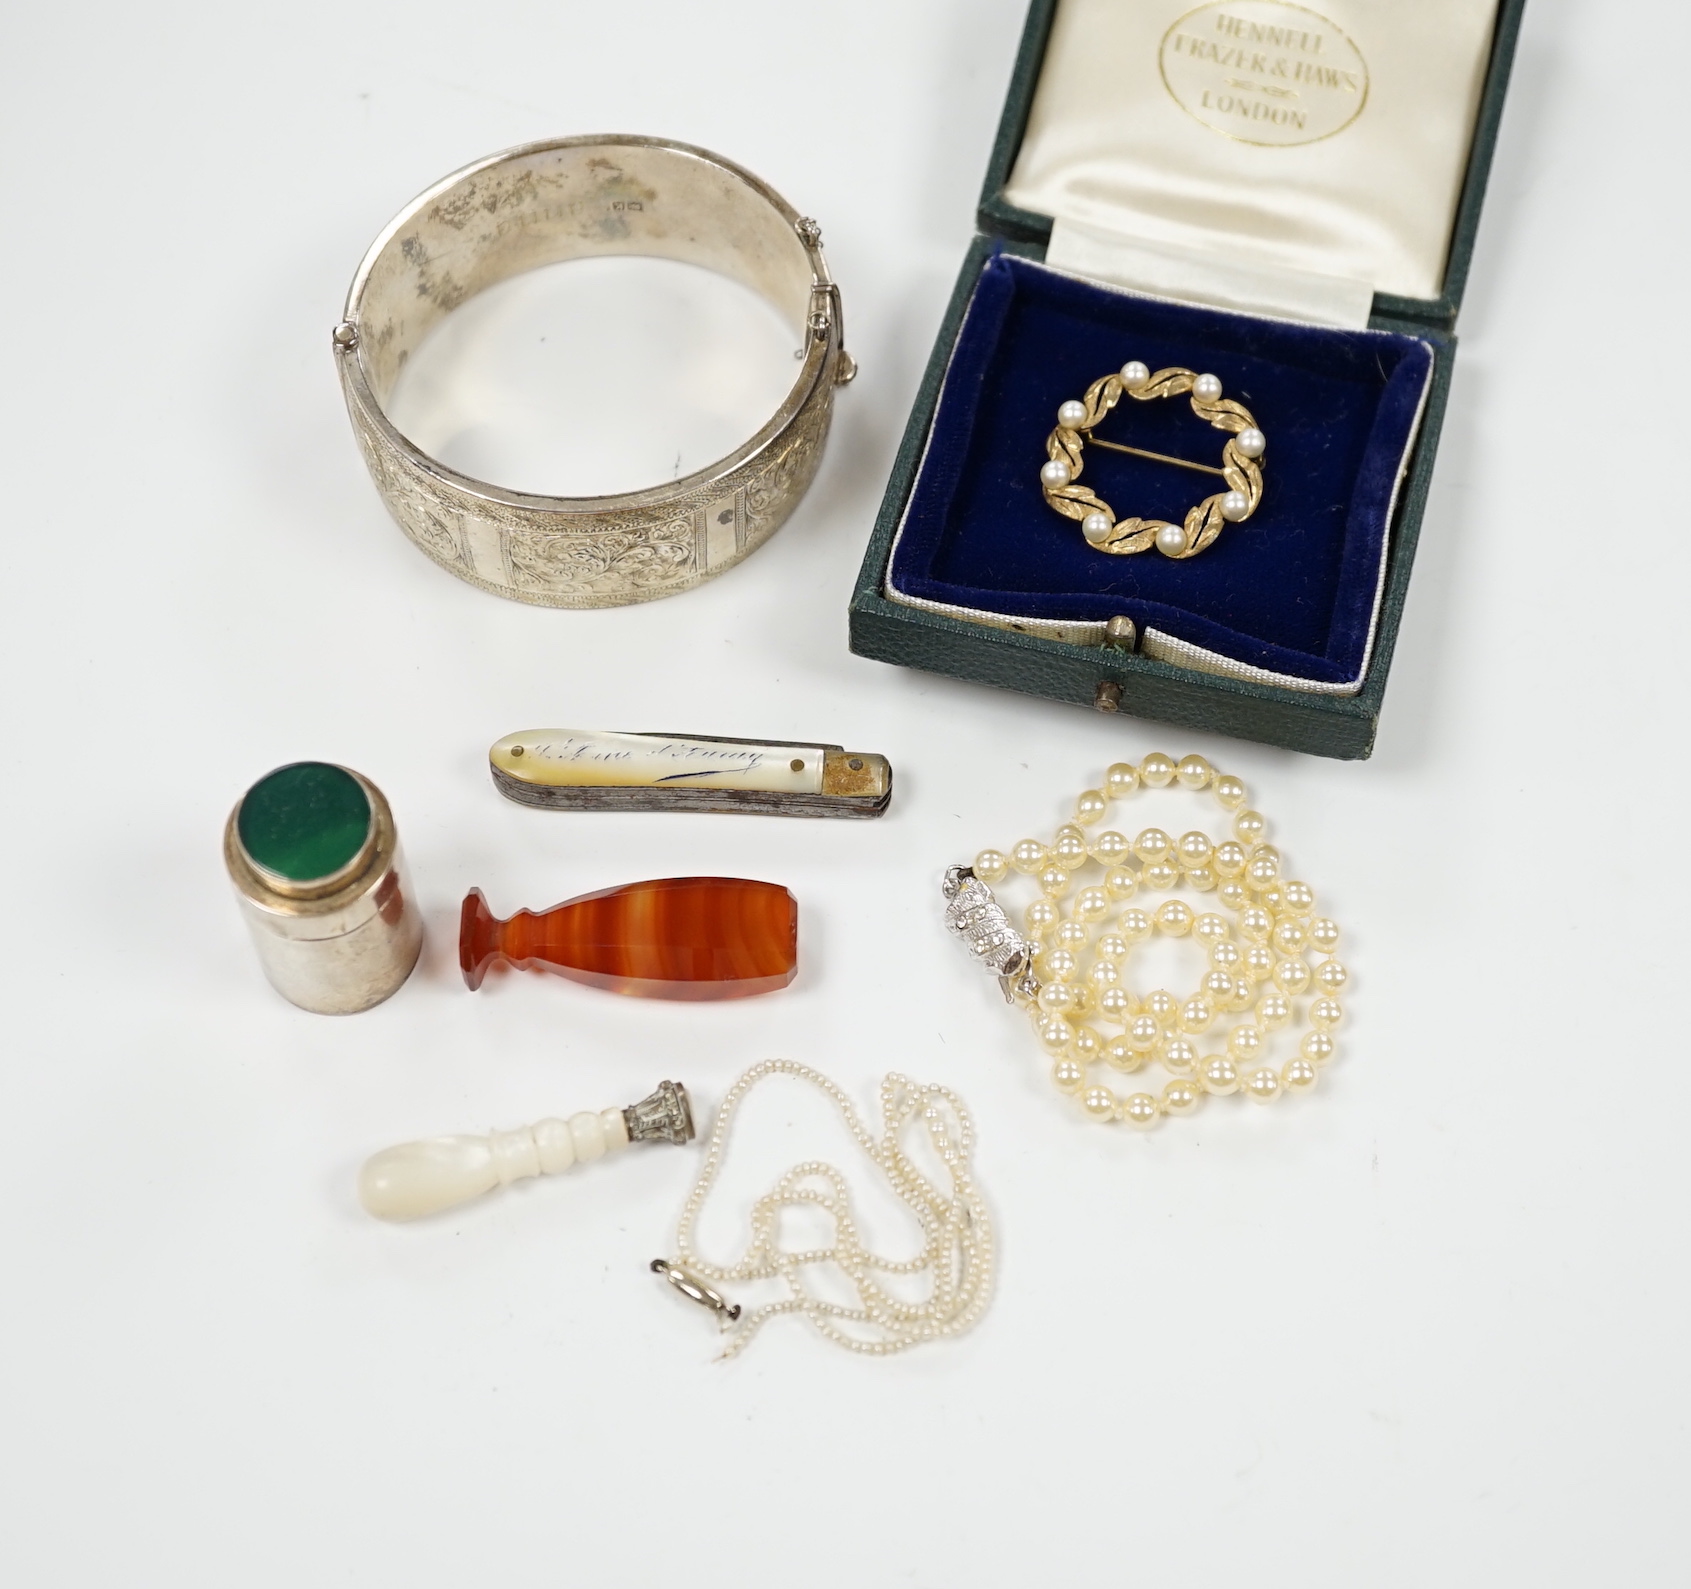 A modern 9ct gold and cultured pearl set circular brooch, 29mm, a silver hinged bangle, seed pearl necklace, a simulated pearl necklace, two seals, a 925 cannister and a pen knife.